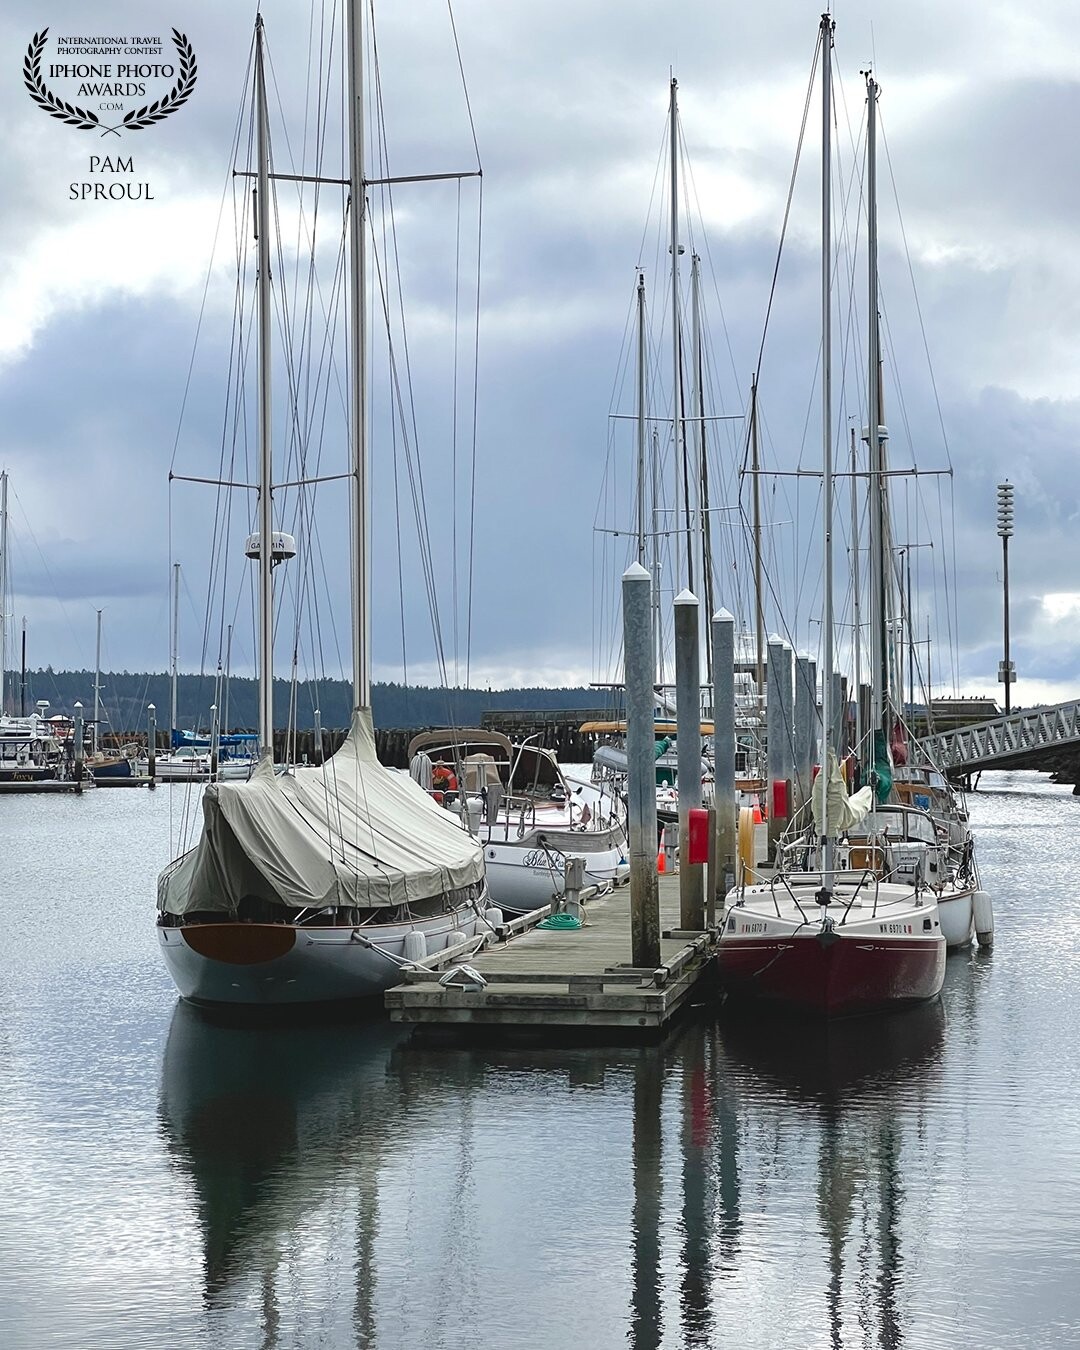 A beautiful day in the salty town of Port Townsend WA ~ this line of sailboats caught my eye with the colors and reflections. You can smell the sea in this image <br />
<br />
Sailboats in Port Townsend -2022